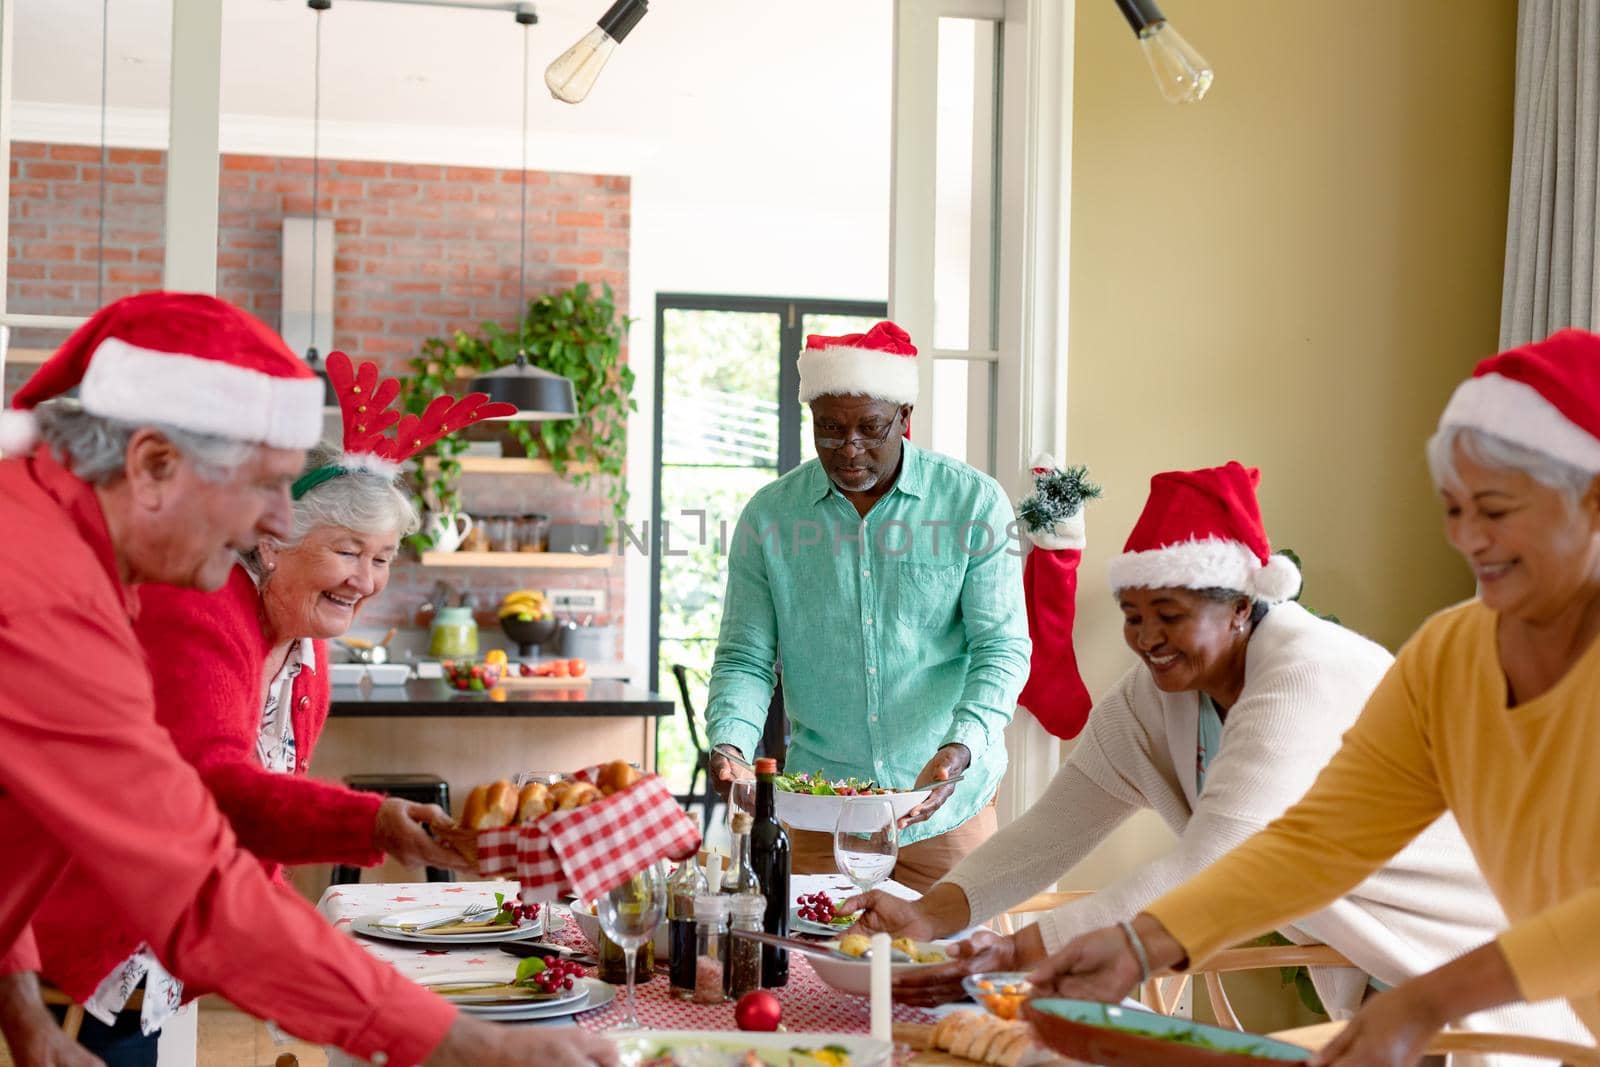 Diverse group of happy senior friends in holiday hats celebrating christmas together at home. christmas festivities, celebrating at home with friends.